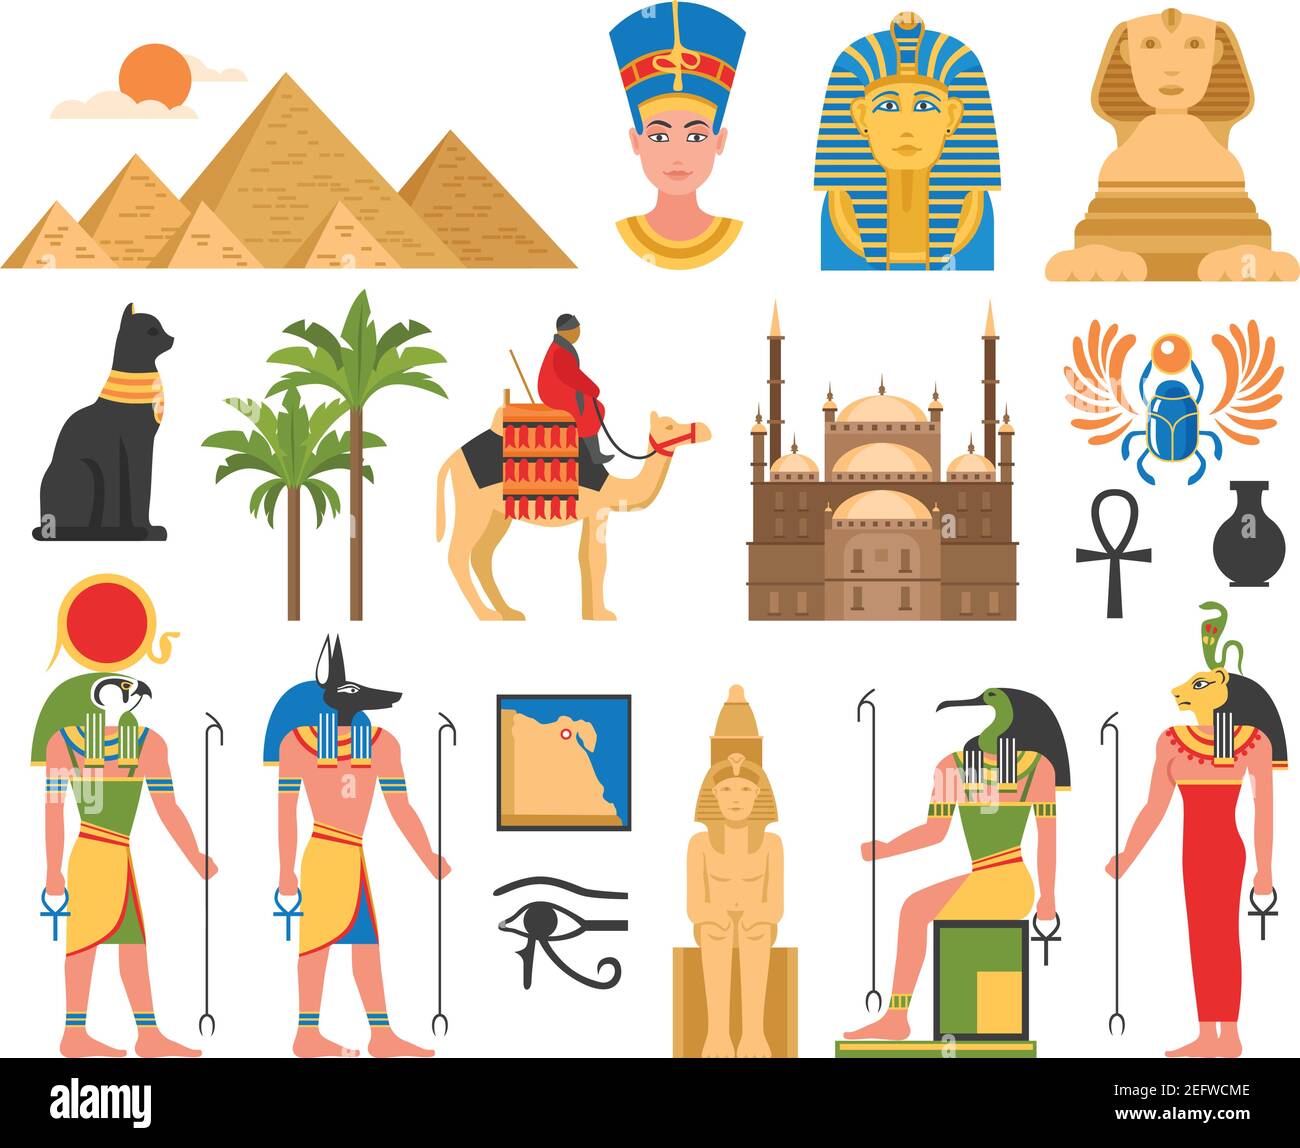 Egypt set of ancient egyptian idols statues and architectural structures flat isolated images on blank background vector illustration Stock Vector